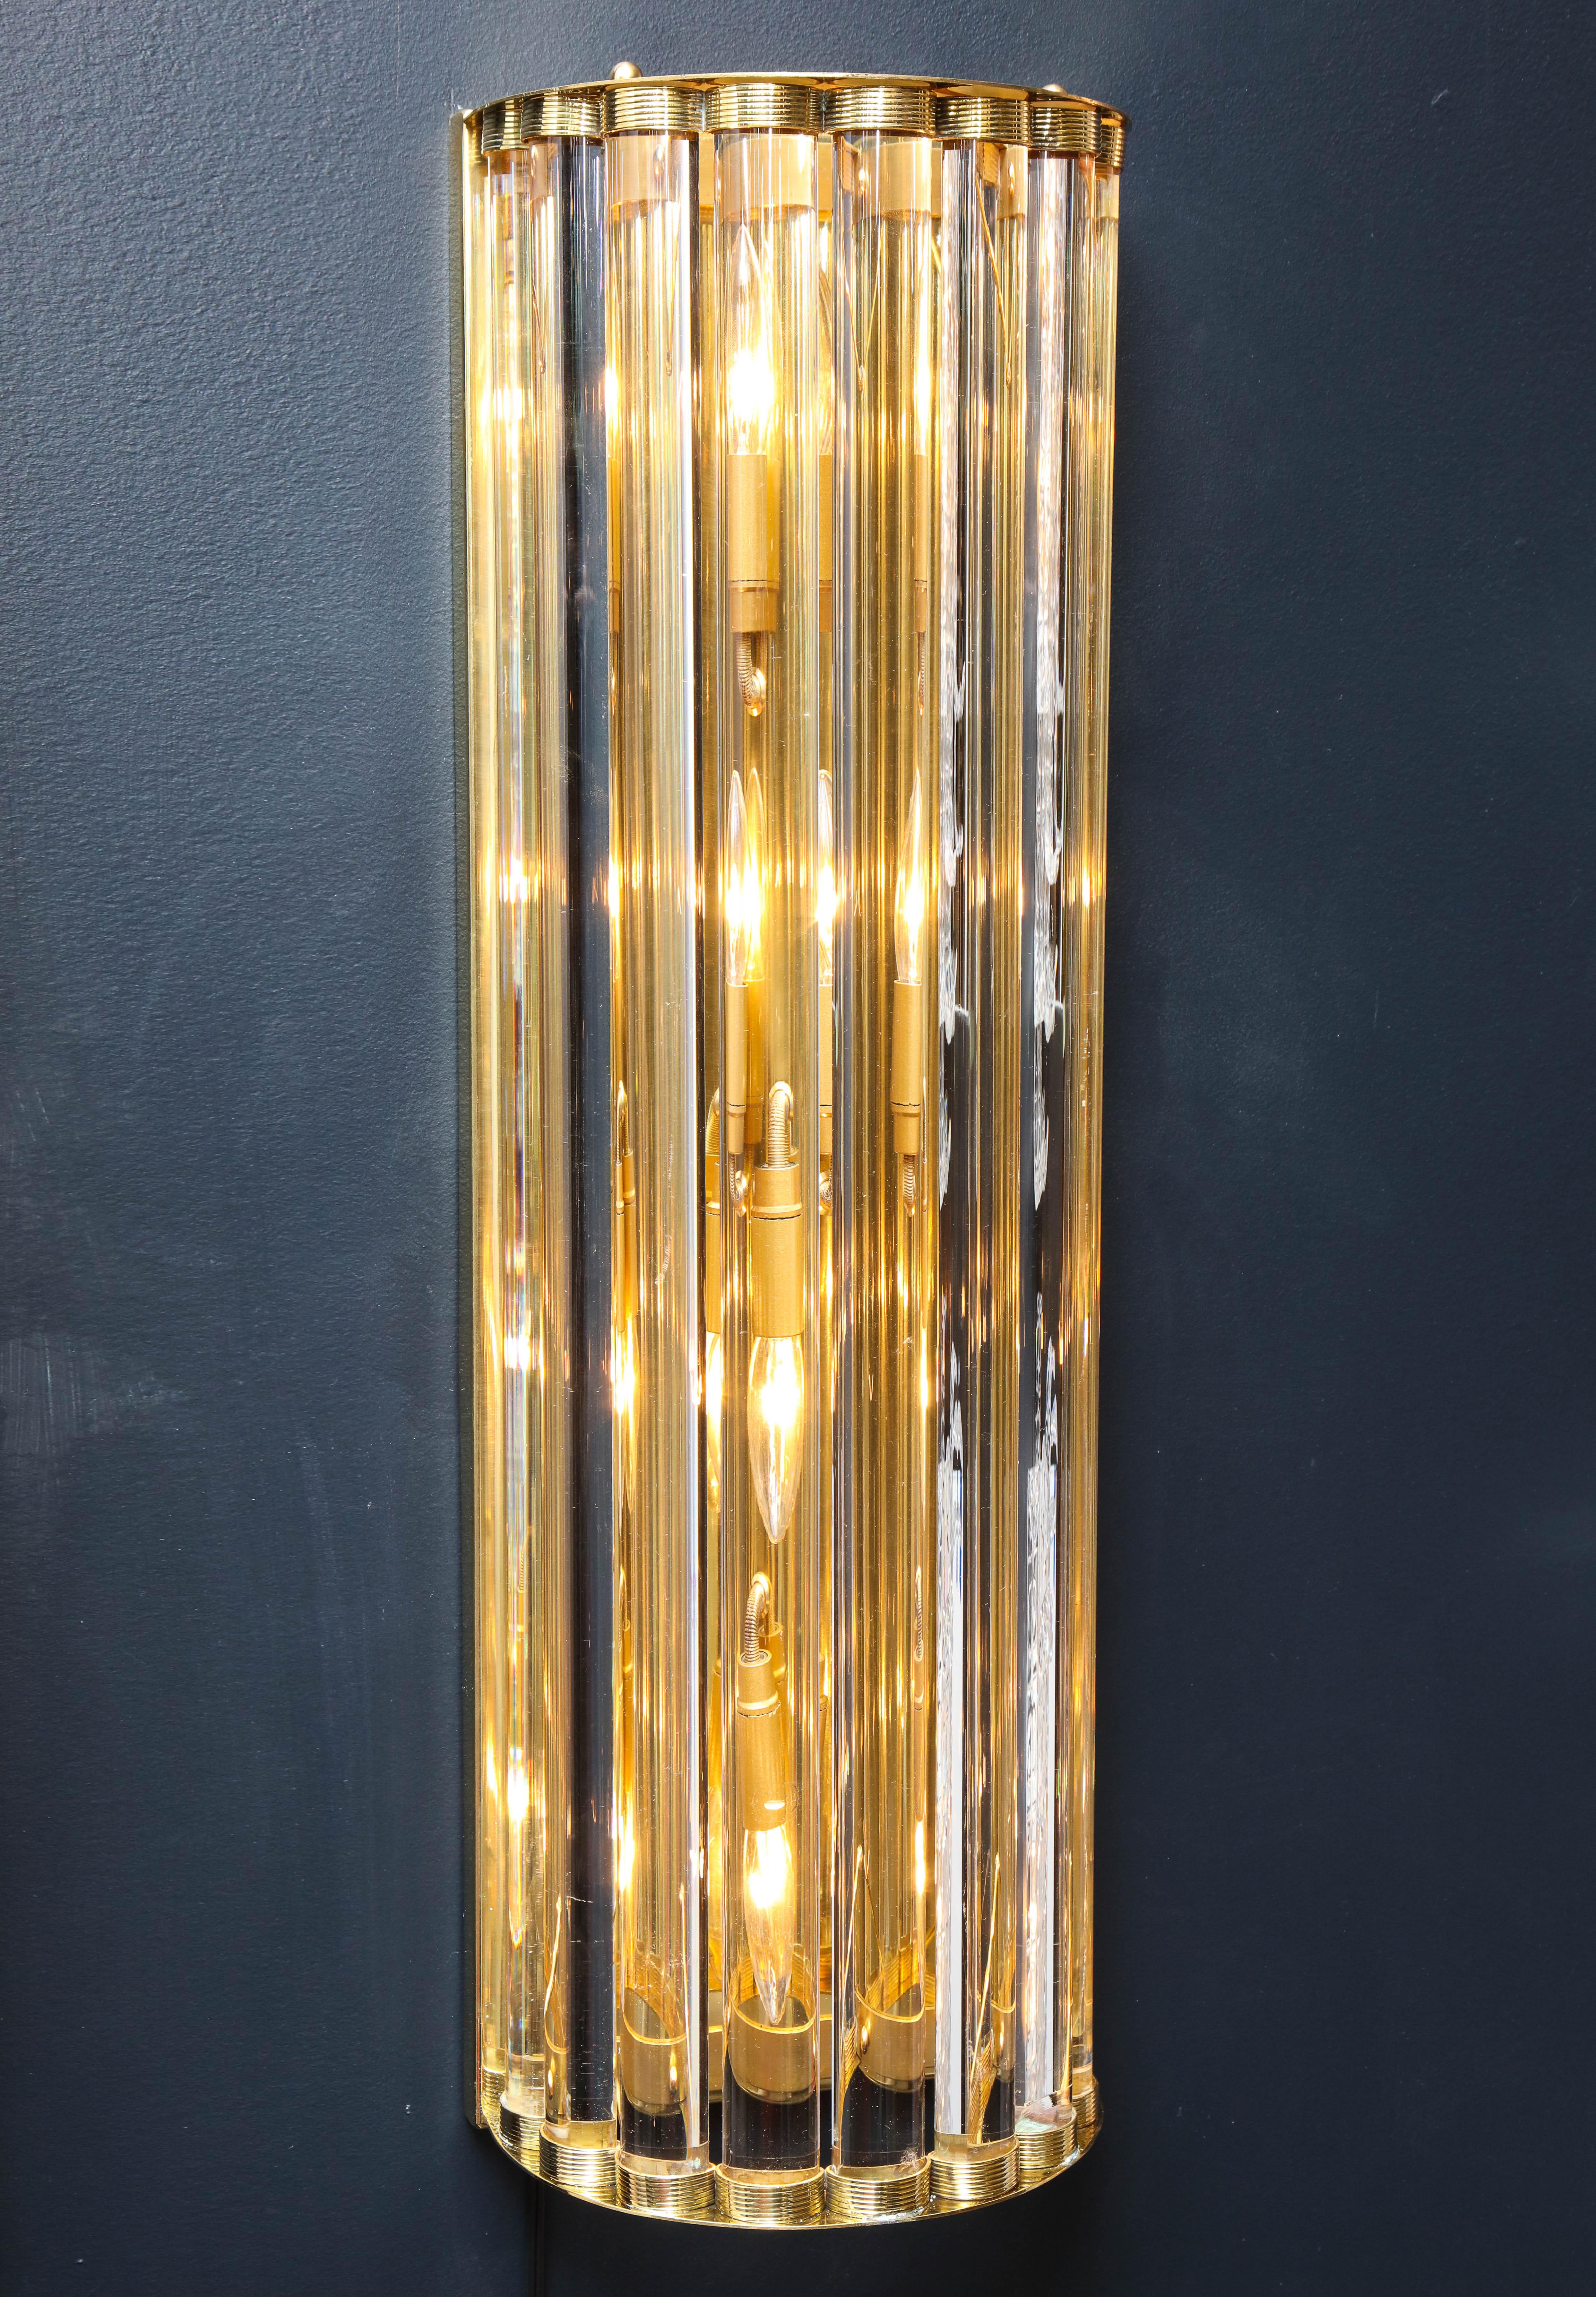 This pair of large Italian handcrafted sconces consist of solid Murano clear glass rods held between two curved solid brass frame structures.  The brass reflects behind the clear round prisms, casting a decadent gold hue. Heavy and substantial.